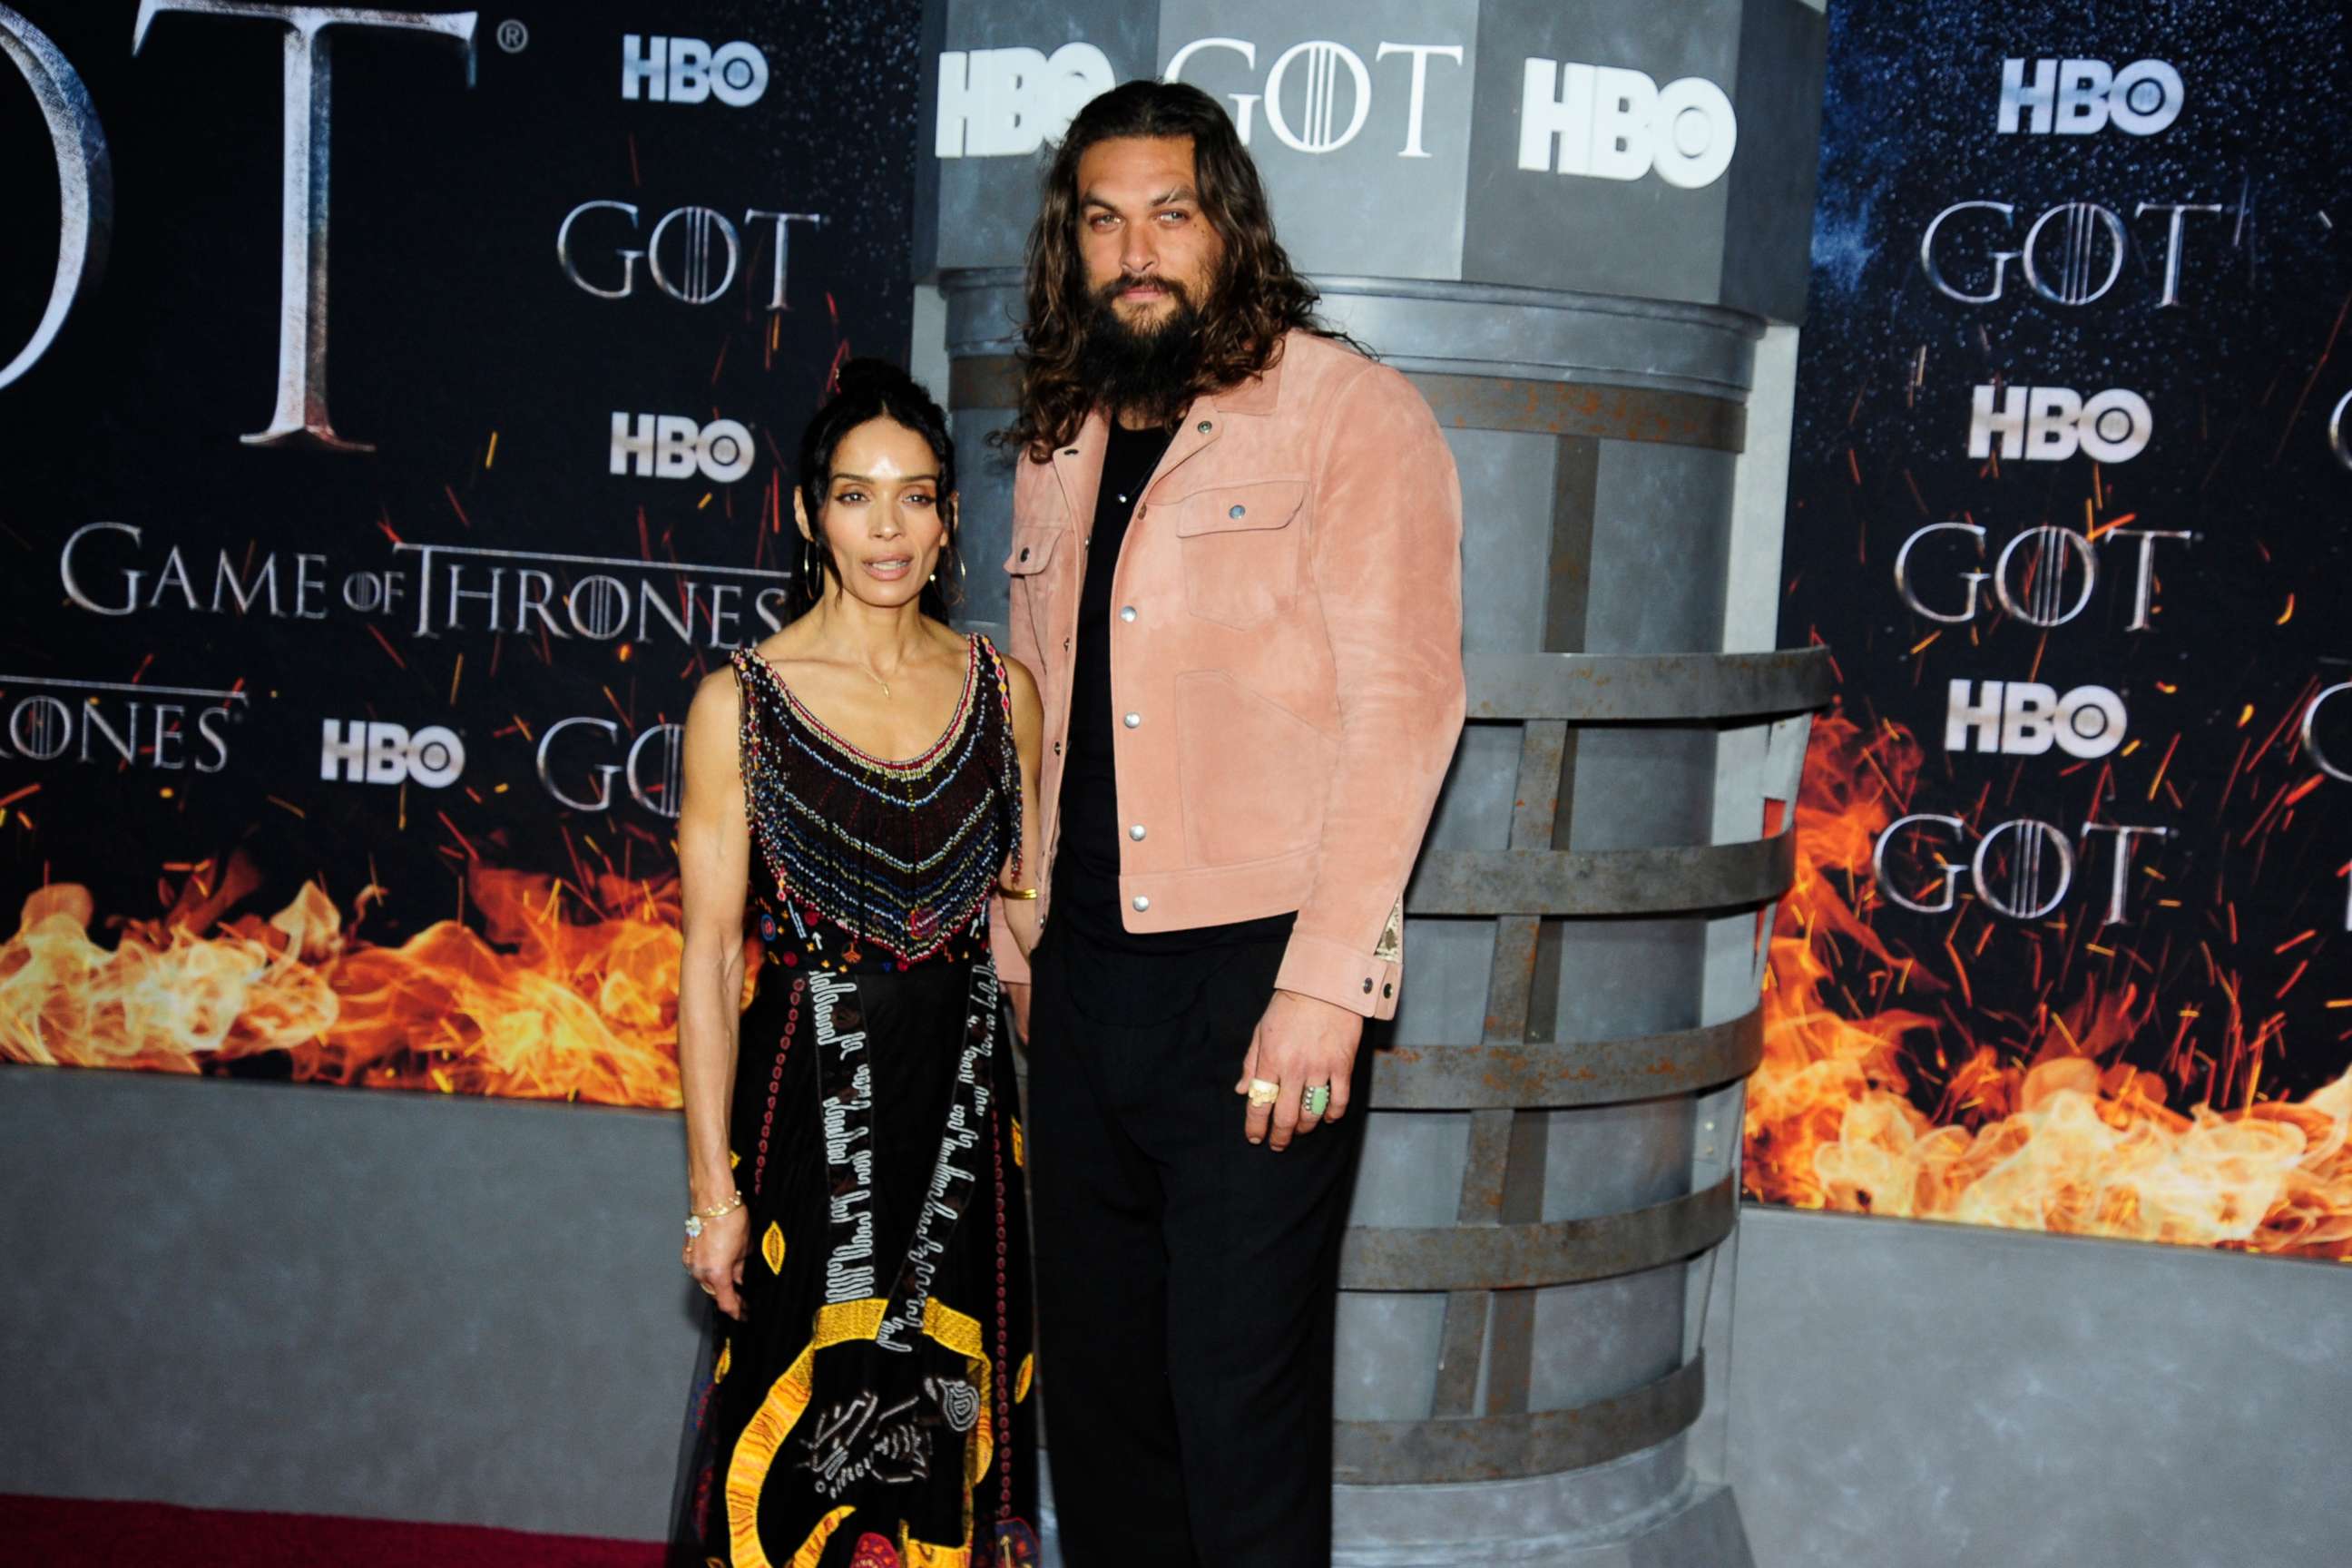 PHOTO: Lisa Bonet and Jason Momoa attend "Game Of Thrones" New York Premiere at Radio City Music Hall, NYC on April 3, 2019 in New York City.